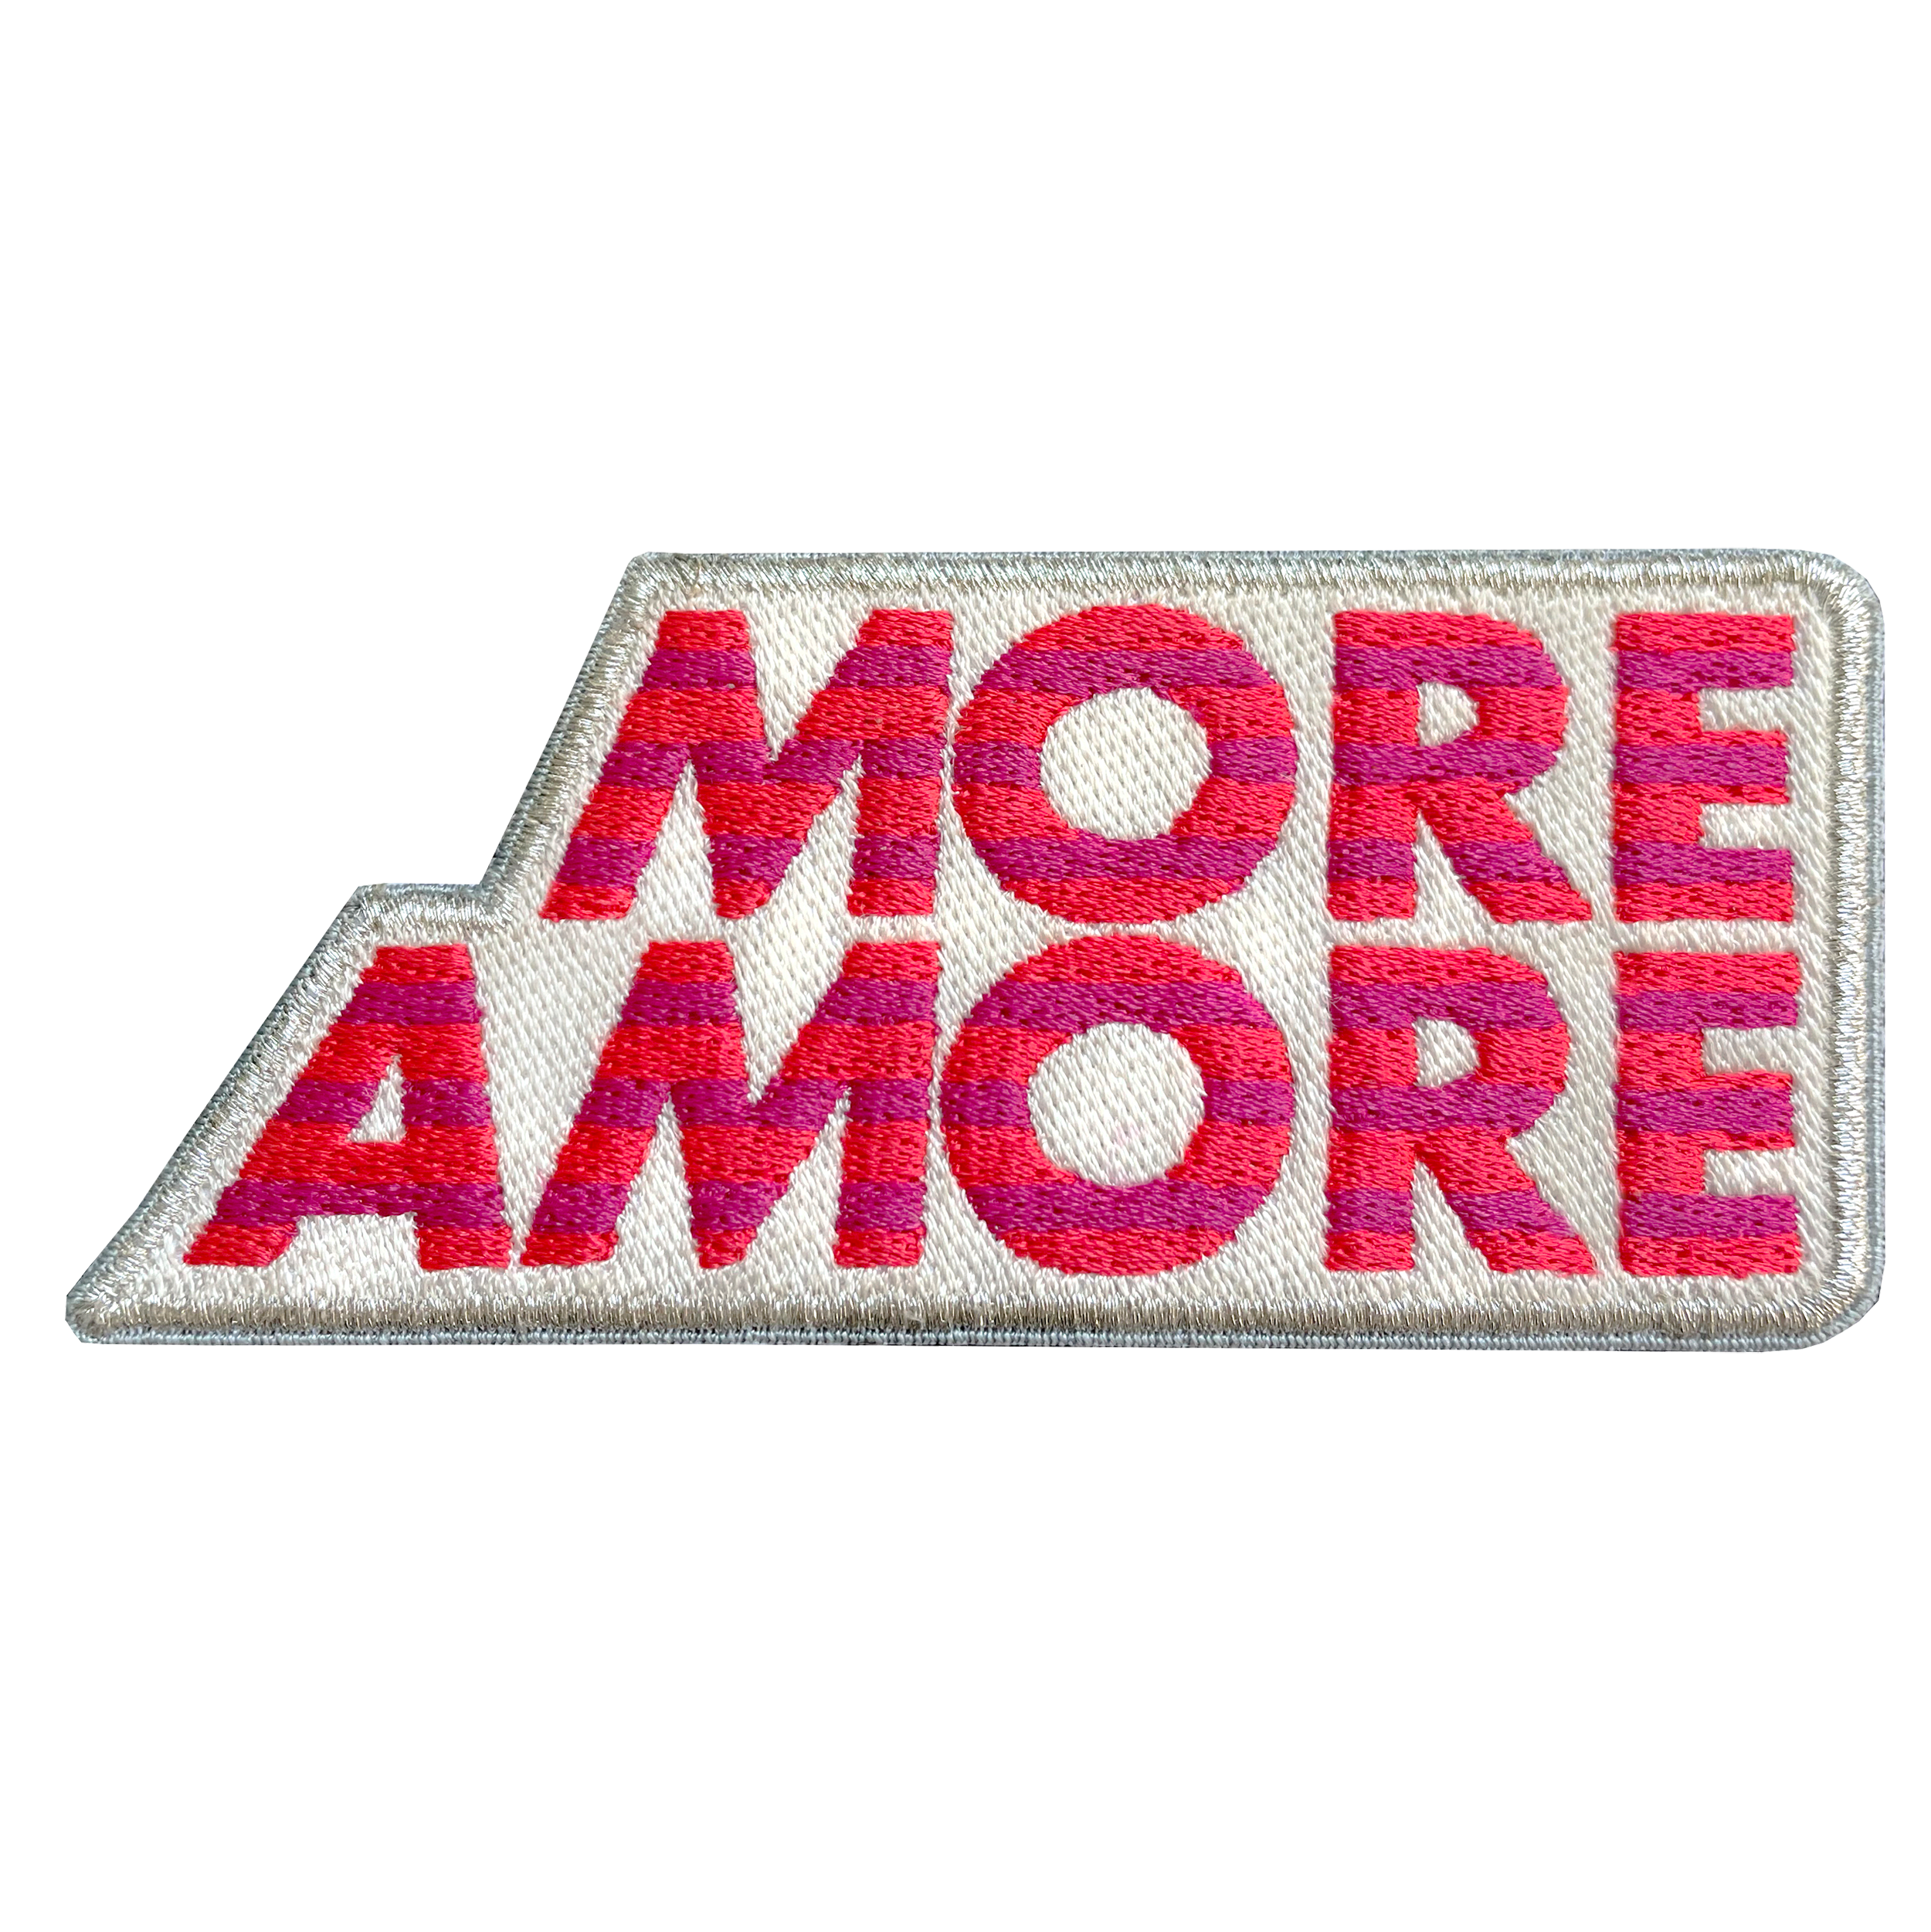 Patch MORE AMORE